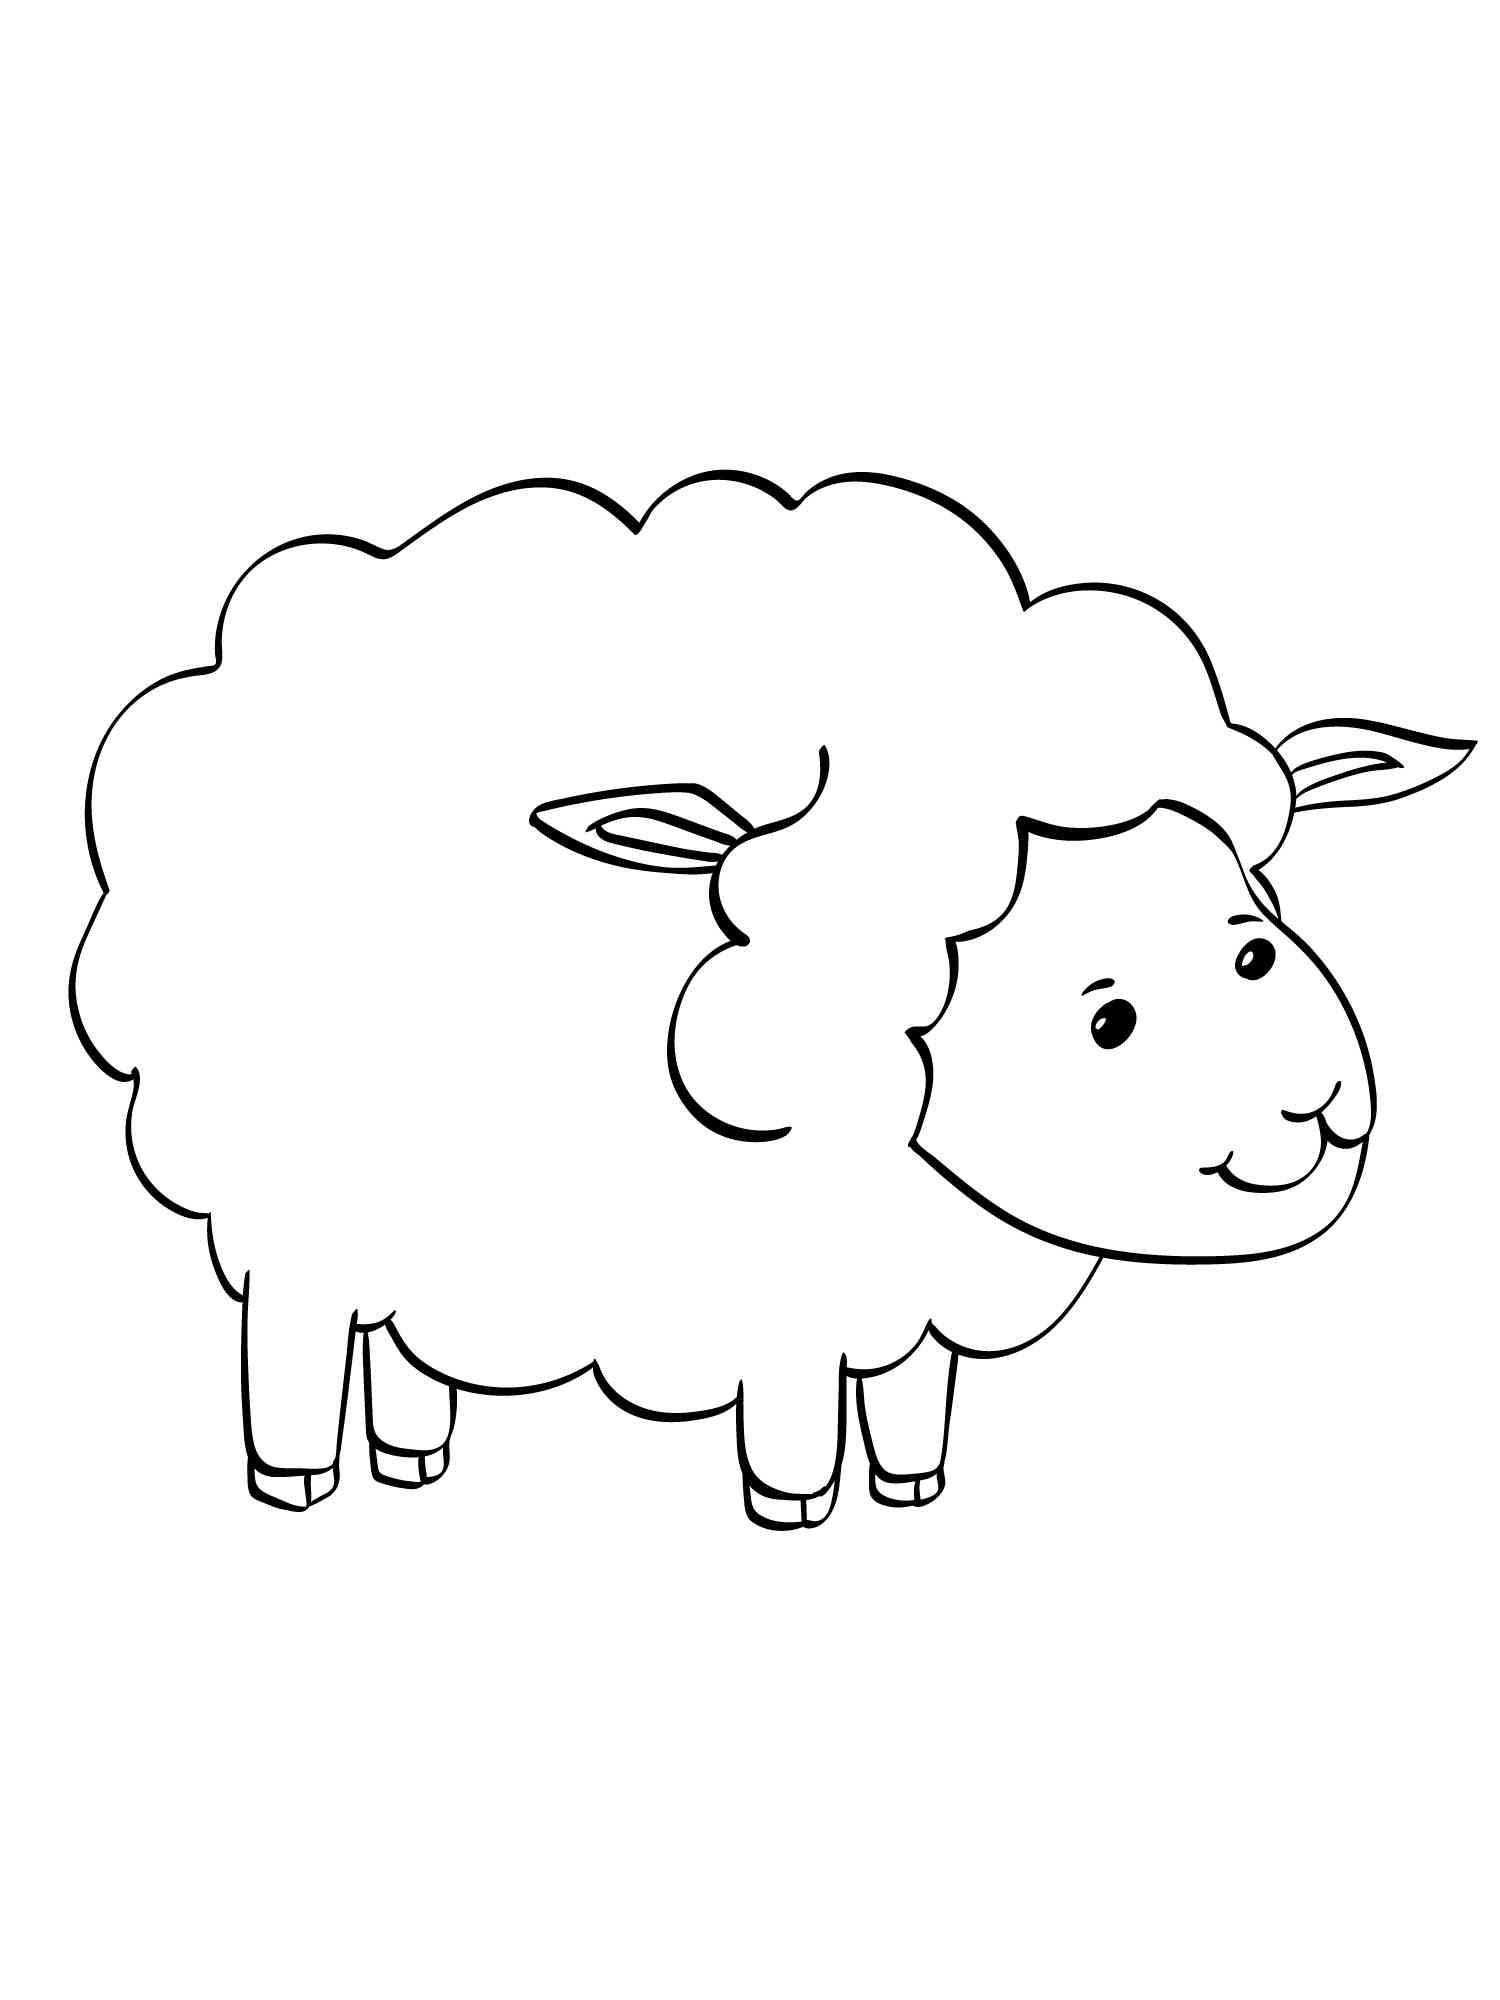 Furry Sheep coloring page